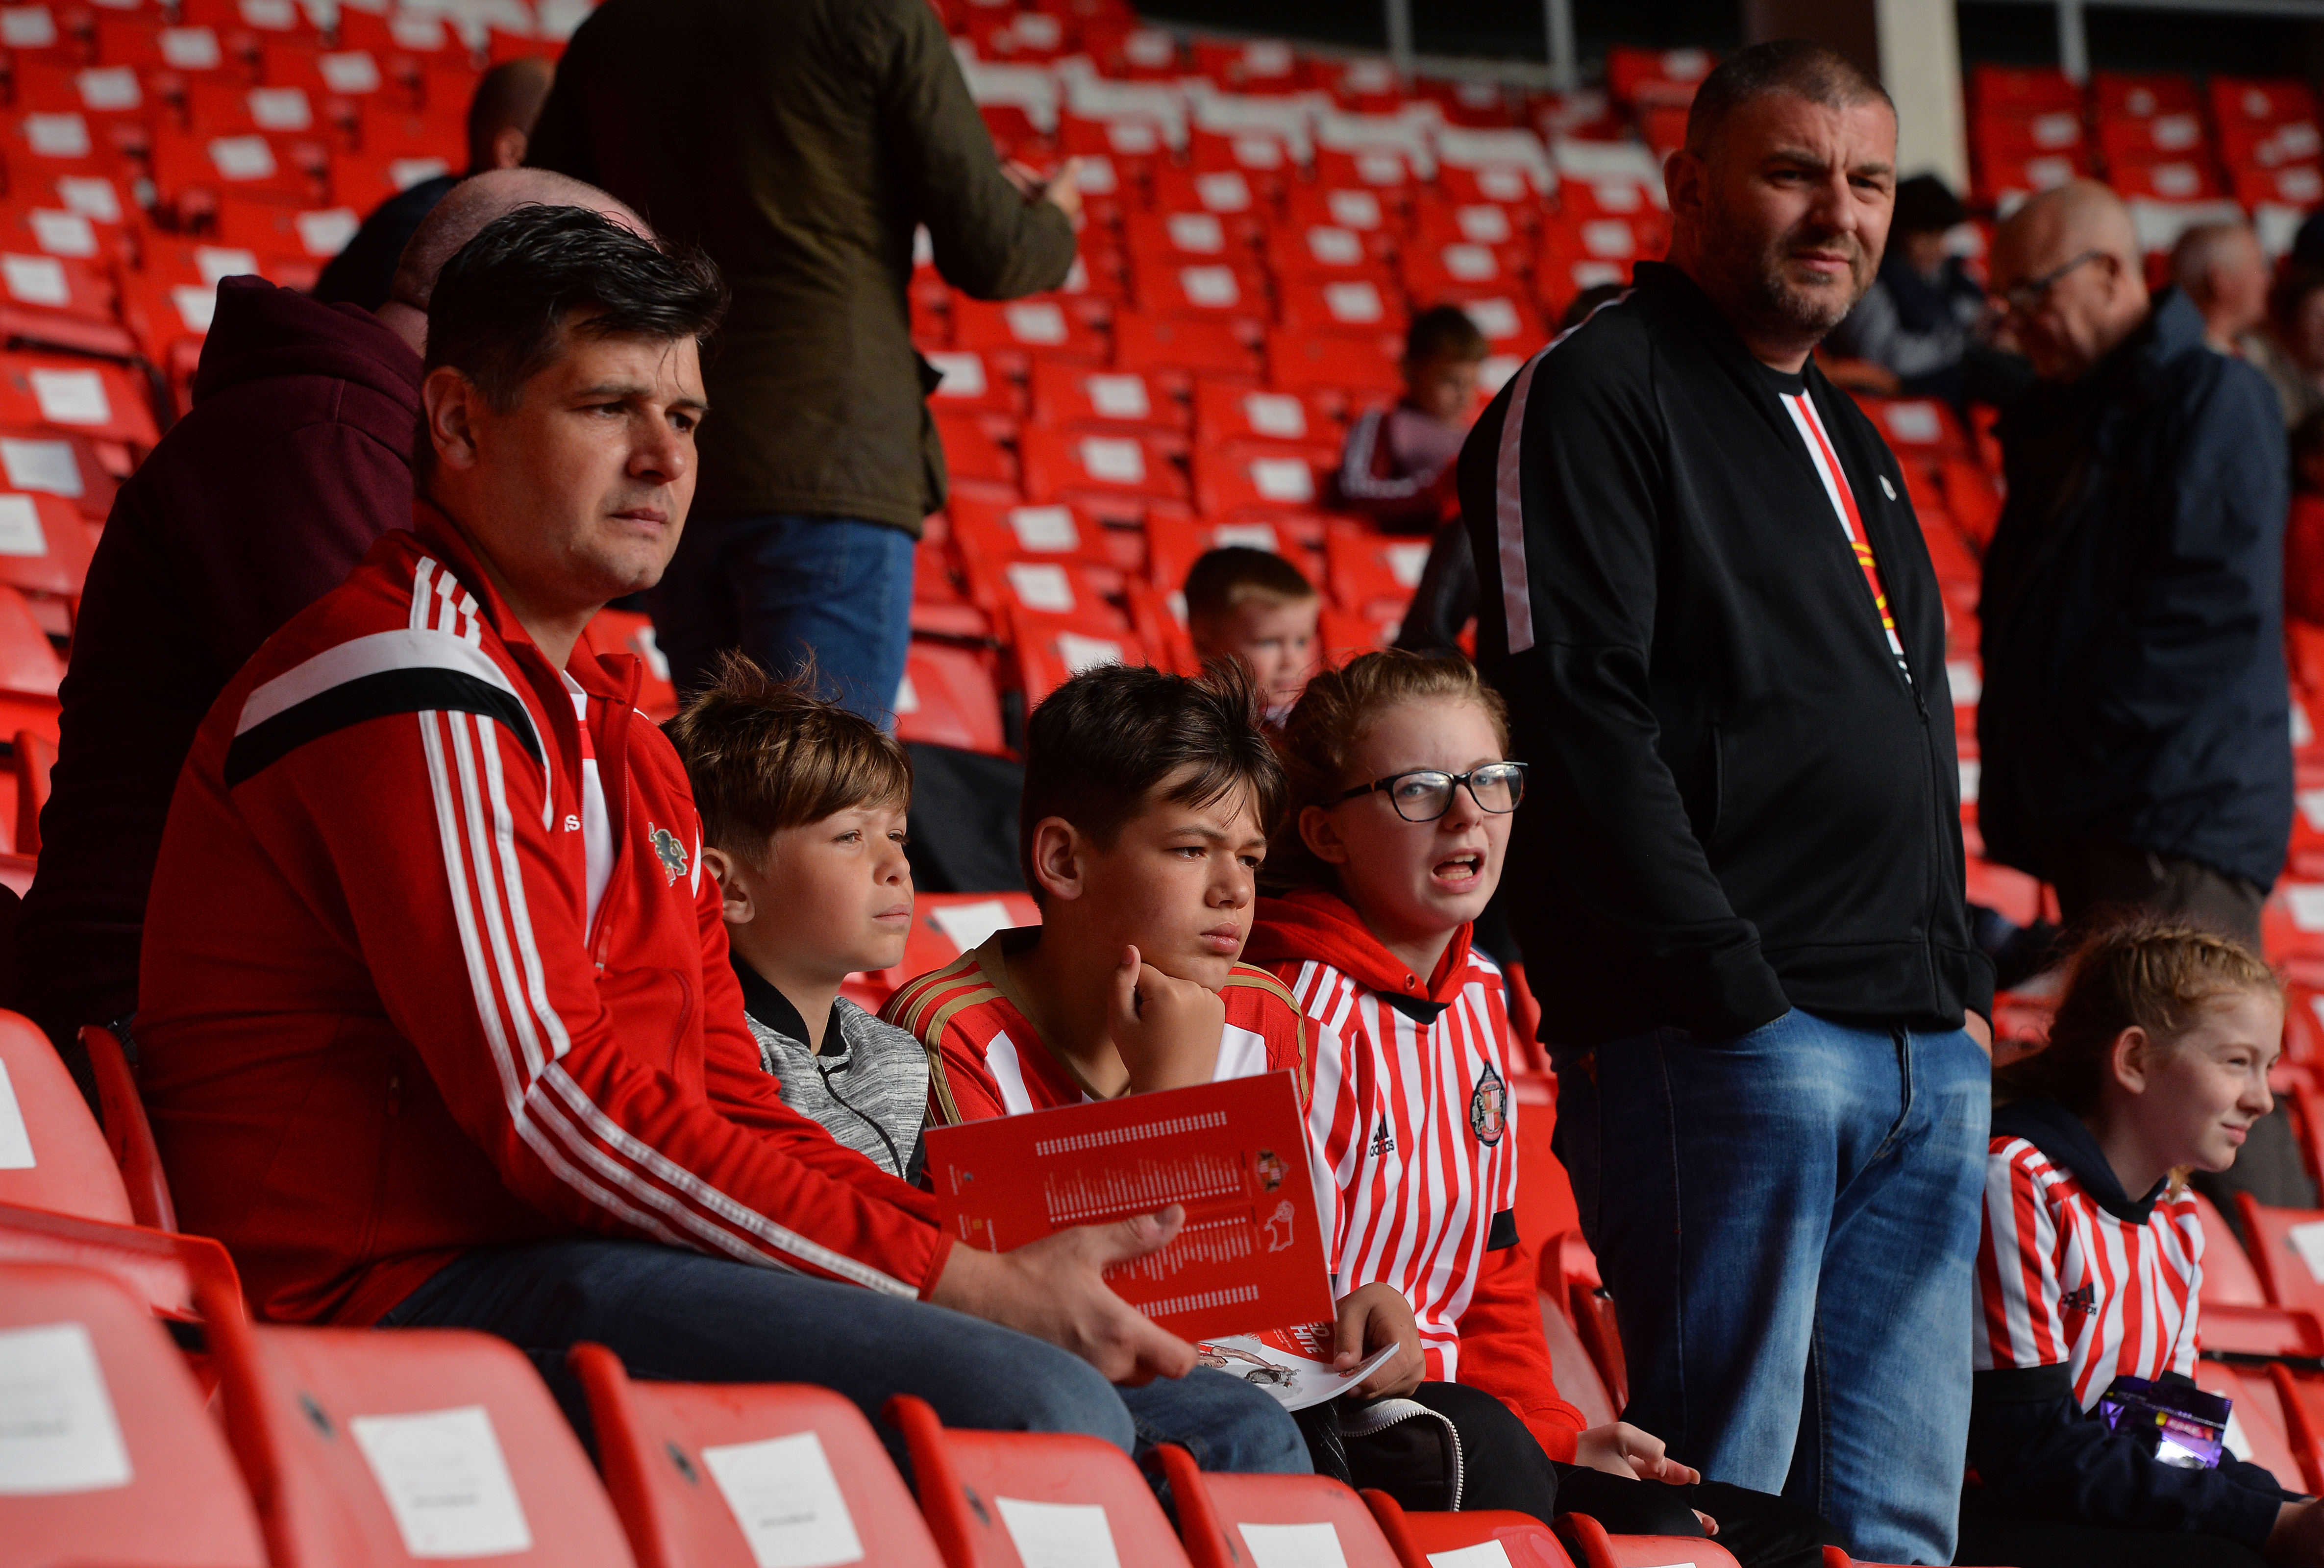 SUNDERLAND, ENGLAND - AUGUST 04:  Sunderland fans look on as players warm up ahead of the Sky Bet Championship match between Sunderland and Derby County at Stadium of Light on August 4, 2017 in Sunderland, England. (Photo by Mark Runnacles/Getty Images)